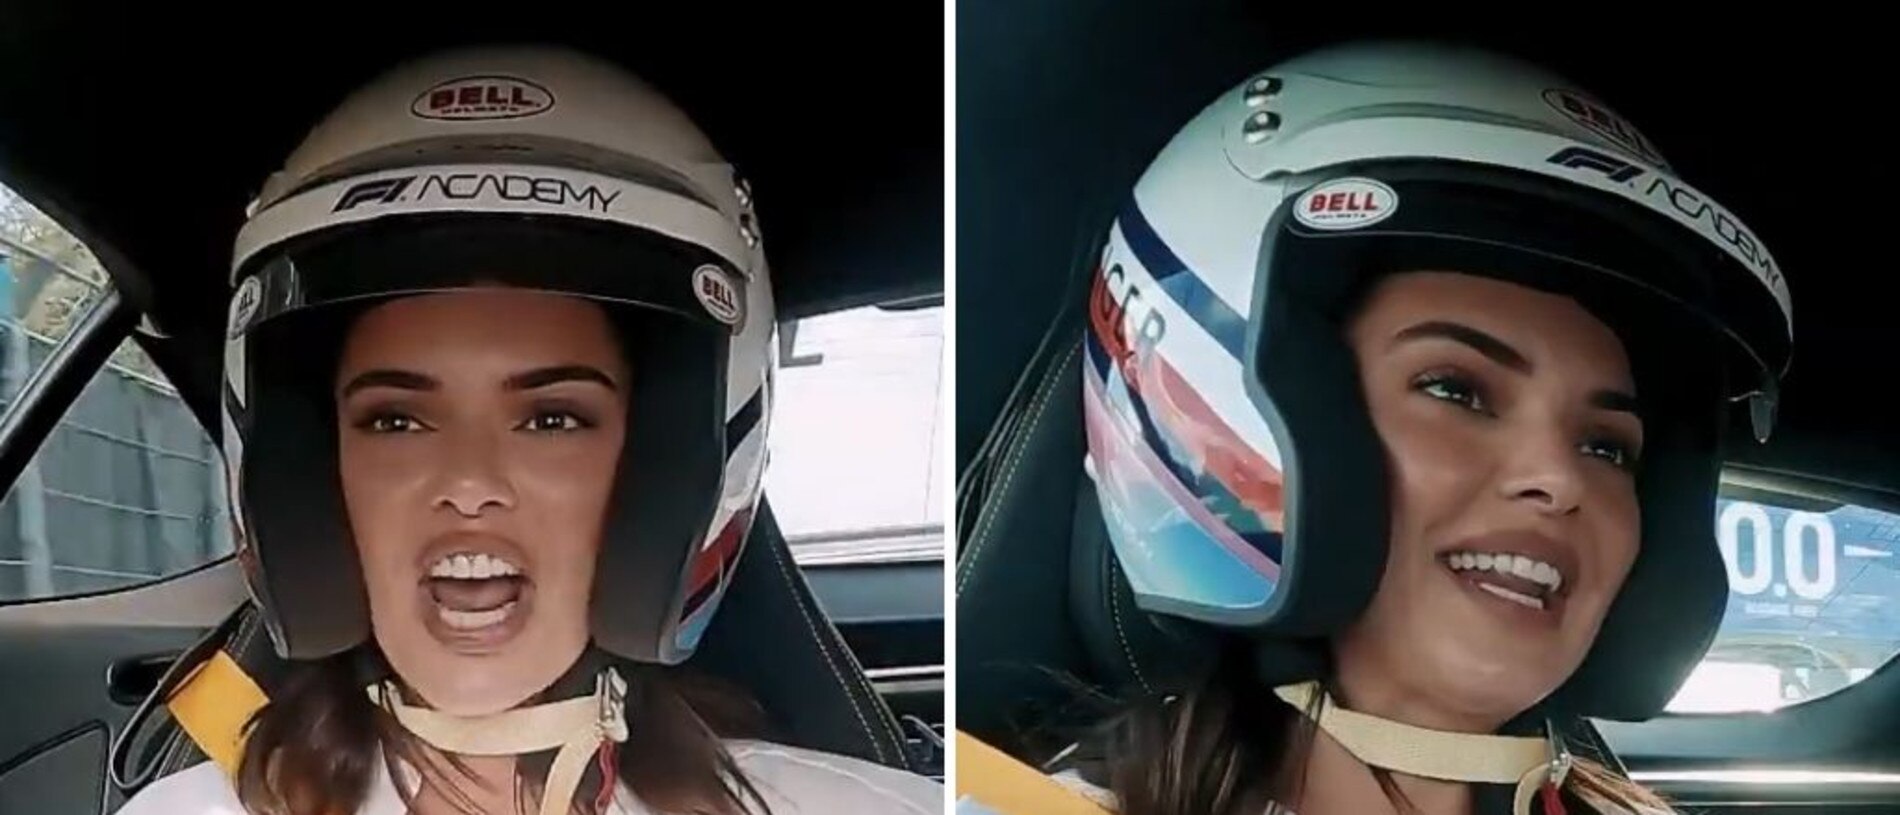 Kendall Jenner doing a hot lap in Miami